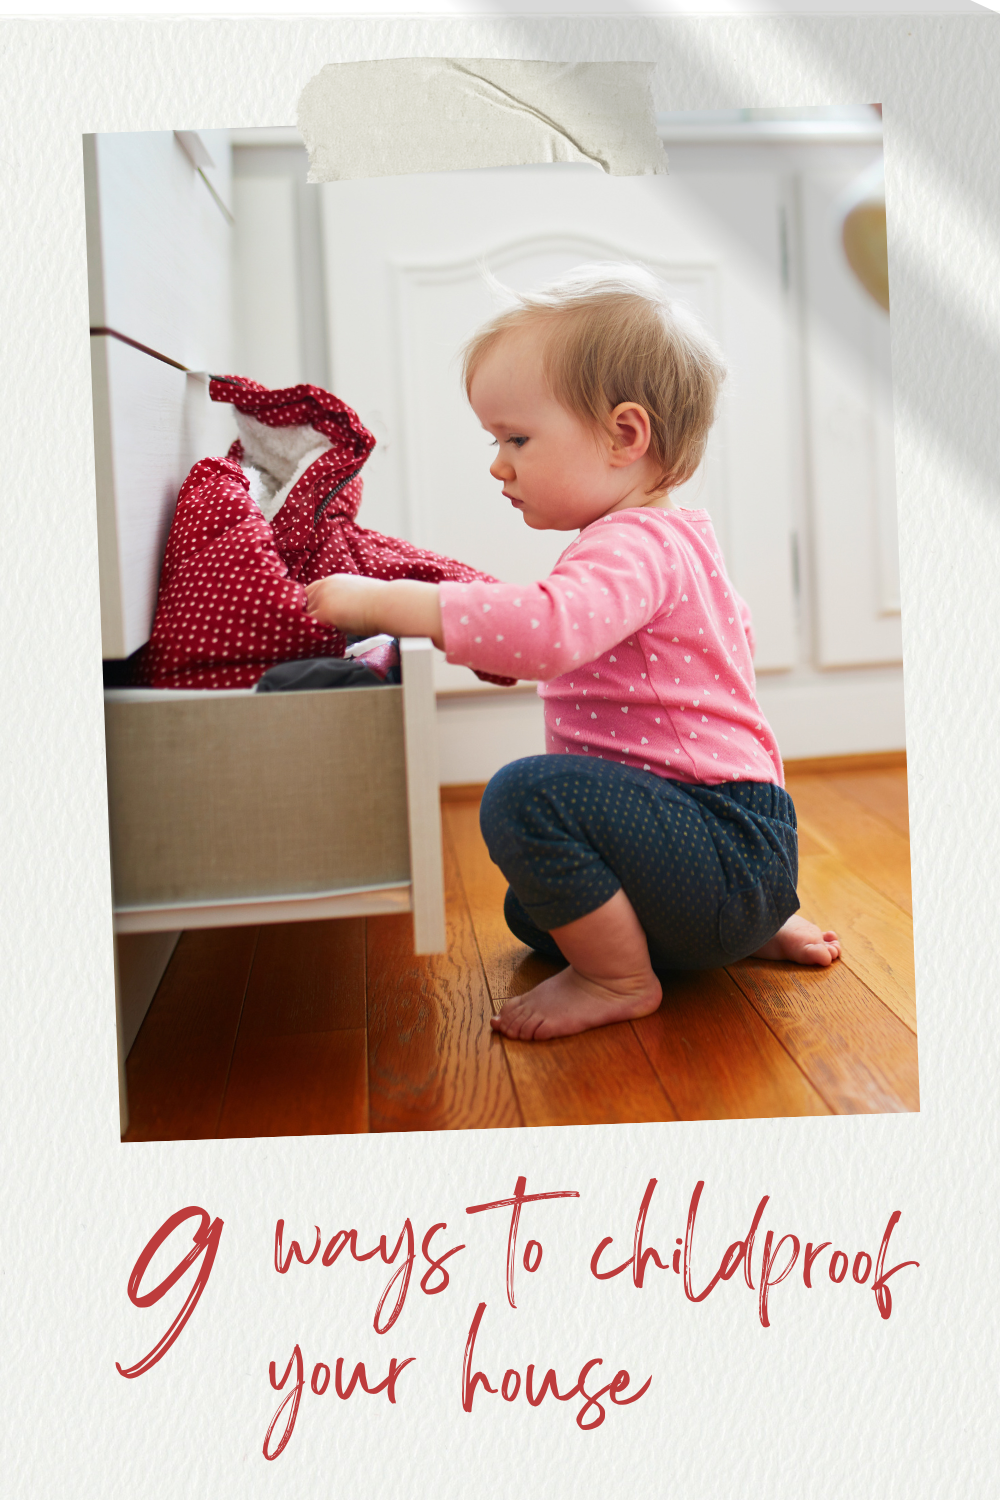 9 Ways To Childproof Your House